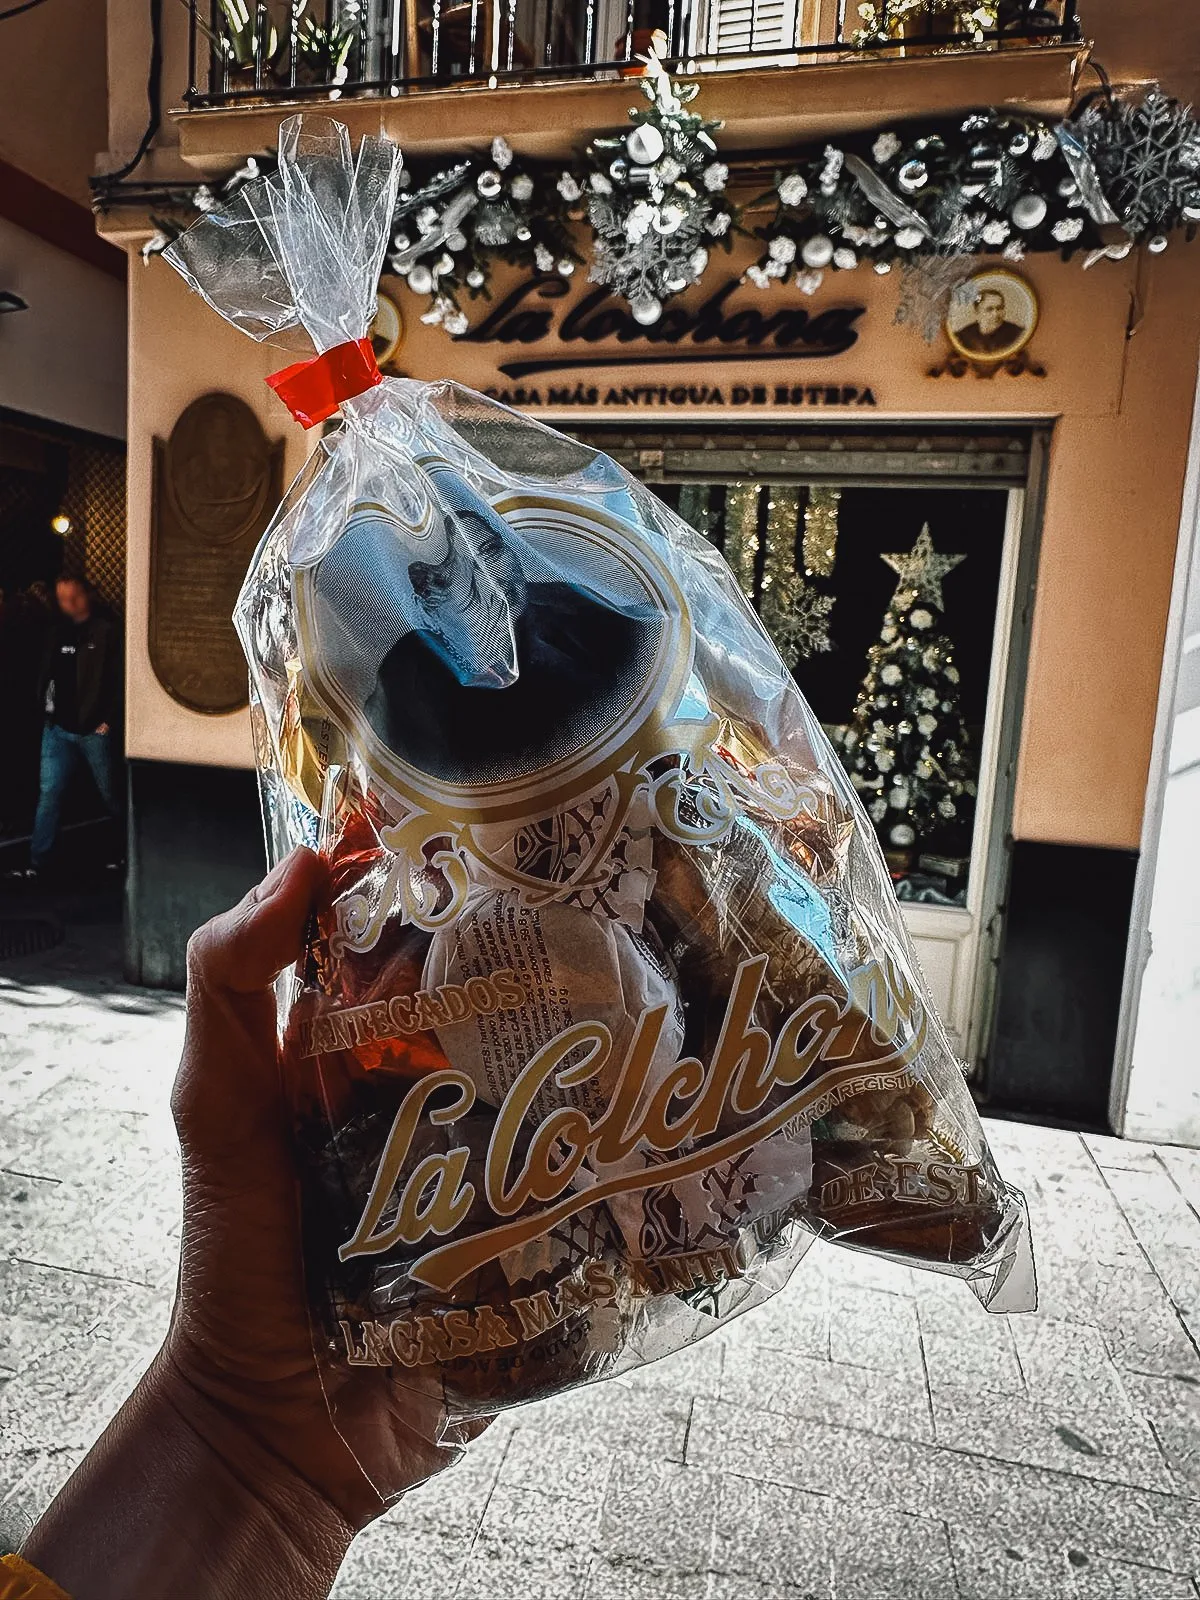 Bag of traditional Spanish confections from a shop in Seville